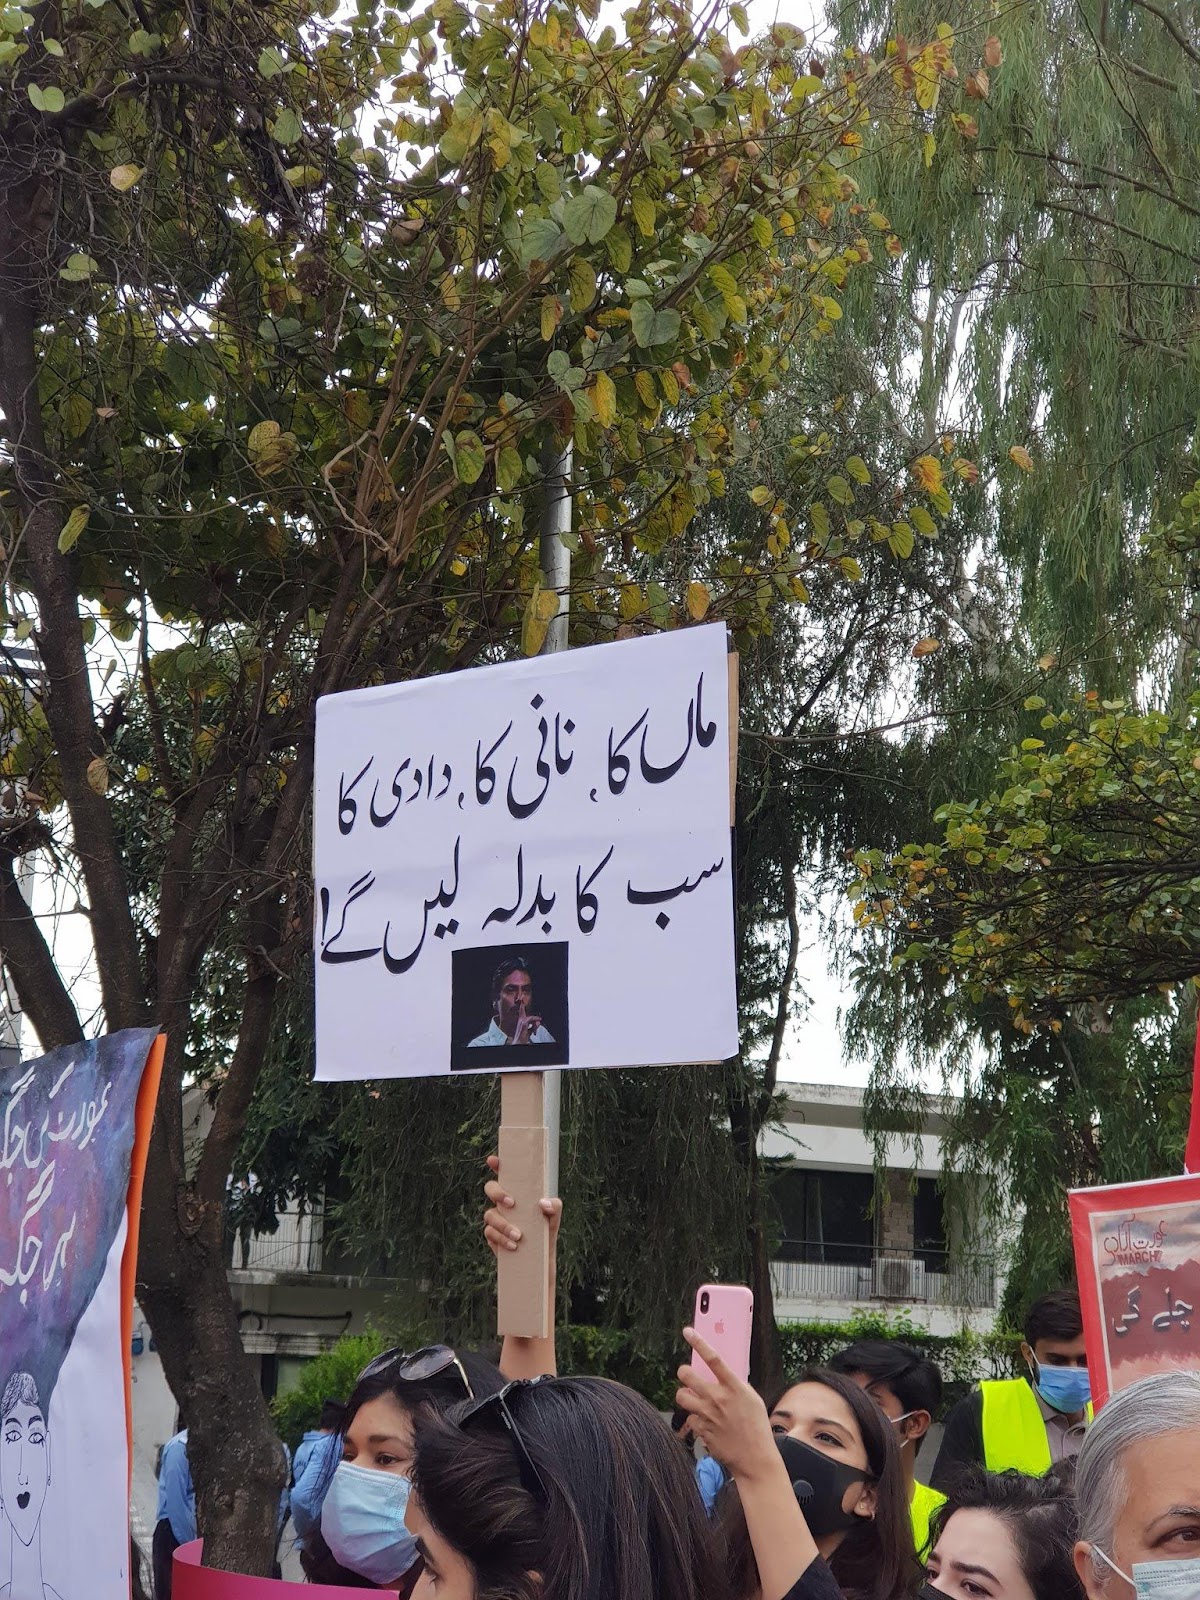 A clever placard says: we will avenge mother, grandmother, all of them. Speaking out against misogyny by using a famous line byNawazuddin Siddiqui from Bollywood movie "Gangs of Wasseypur".